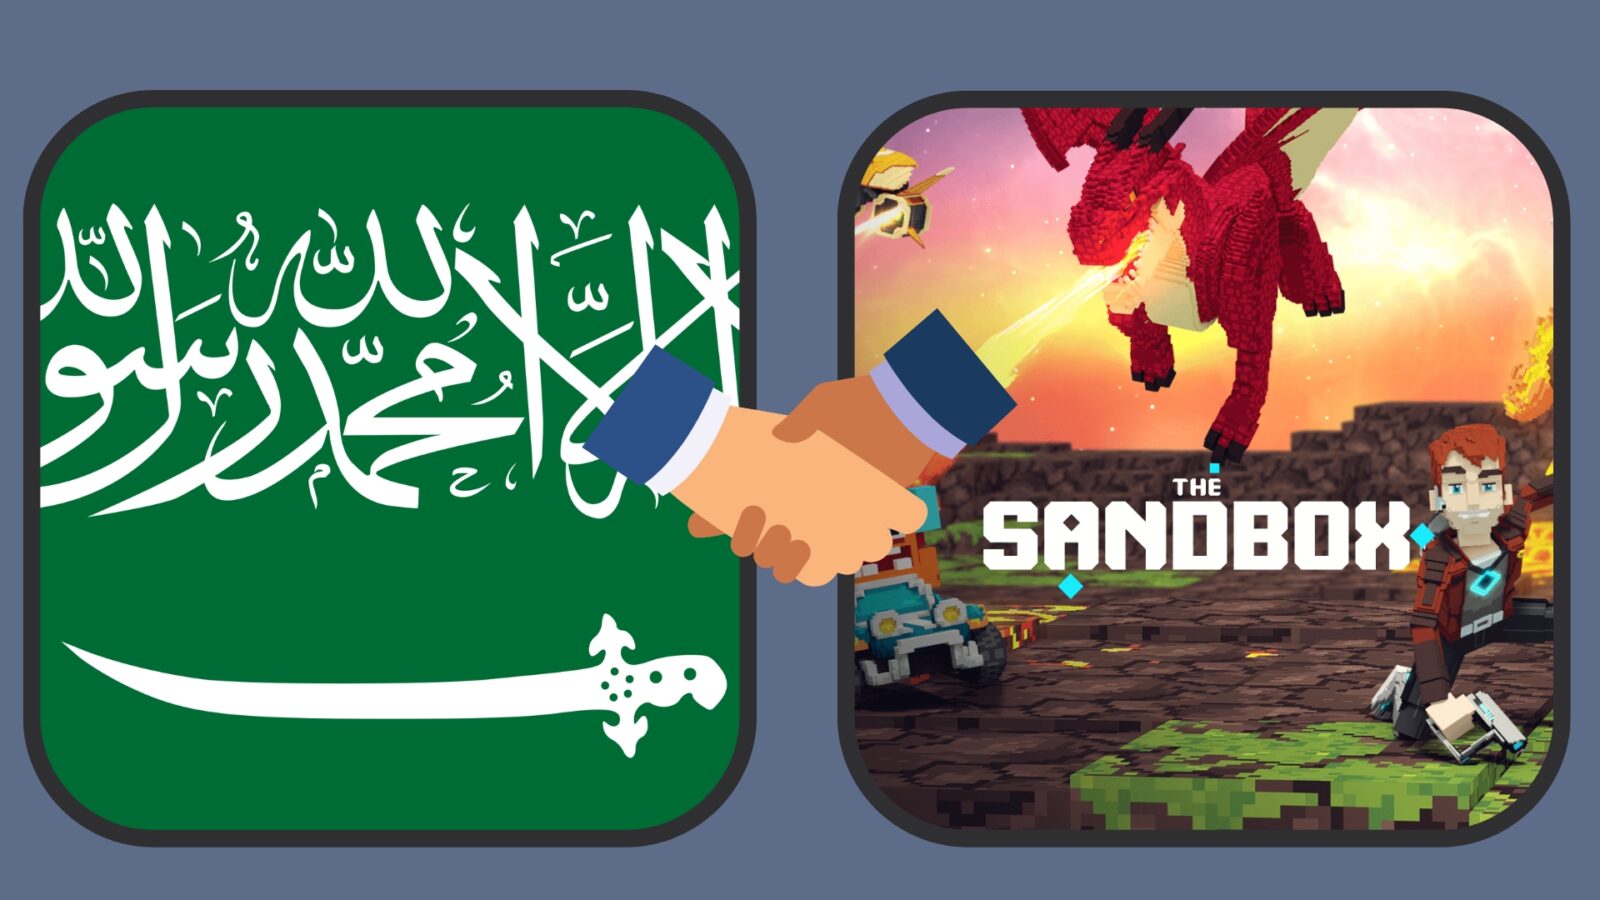 COO of the Sandbox Game, Sebastian Borget, announced on Feb. 7 a new partnership with the Saudi Arabia Digital Government Authority (DGA) via its Twitter account.